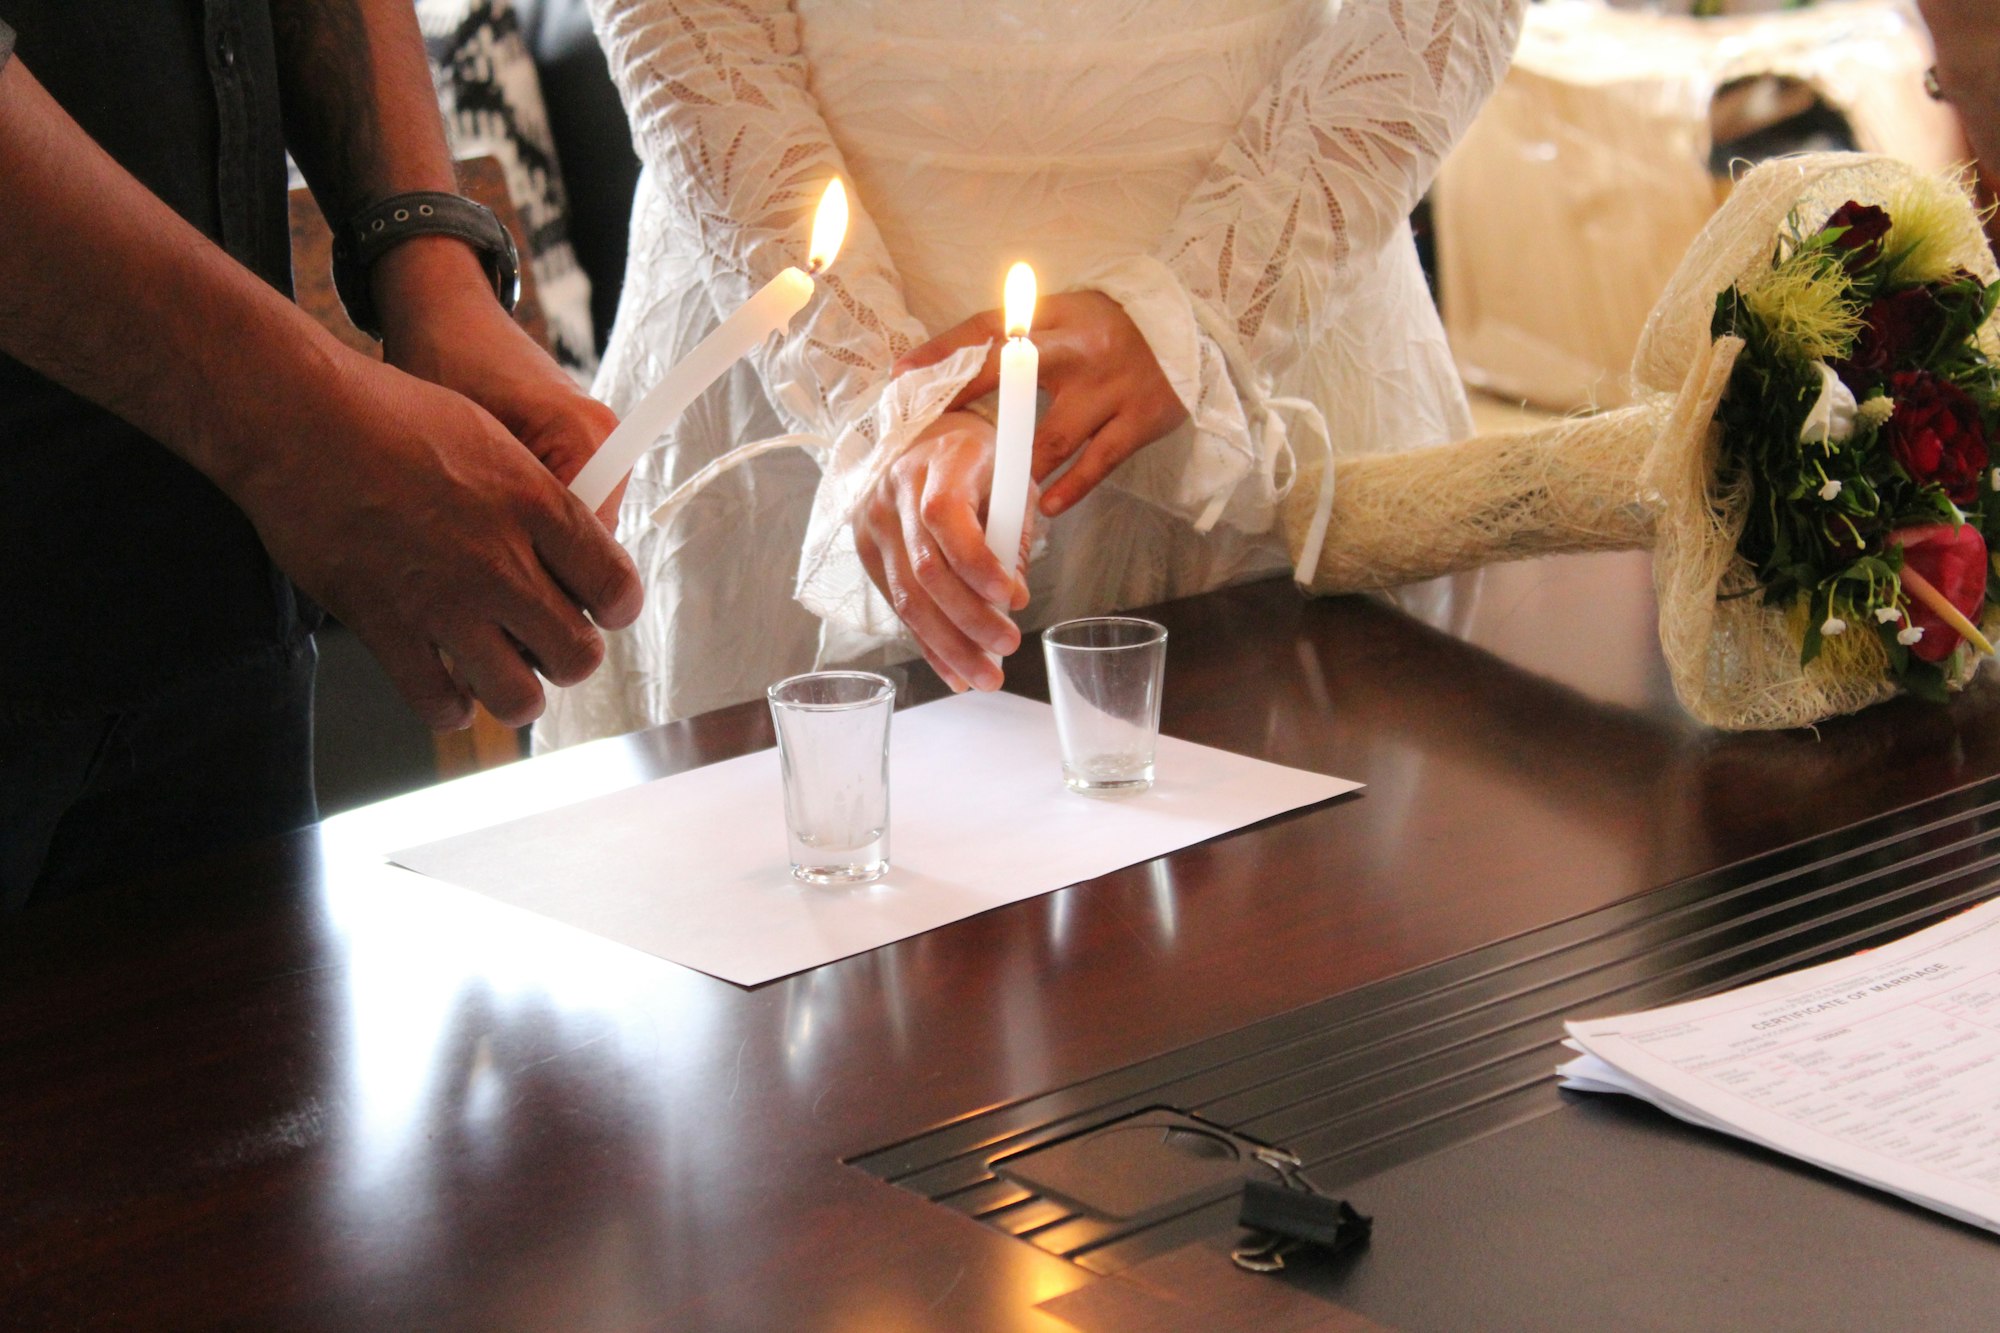 Lighting candles at a wedding